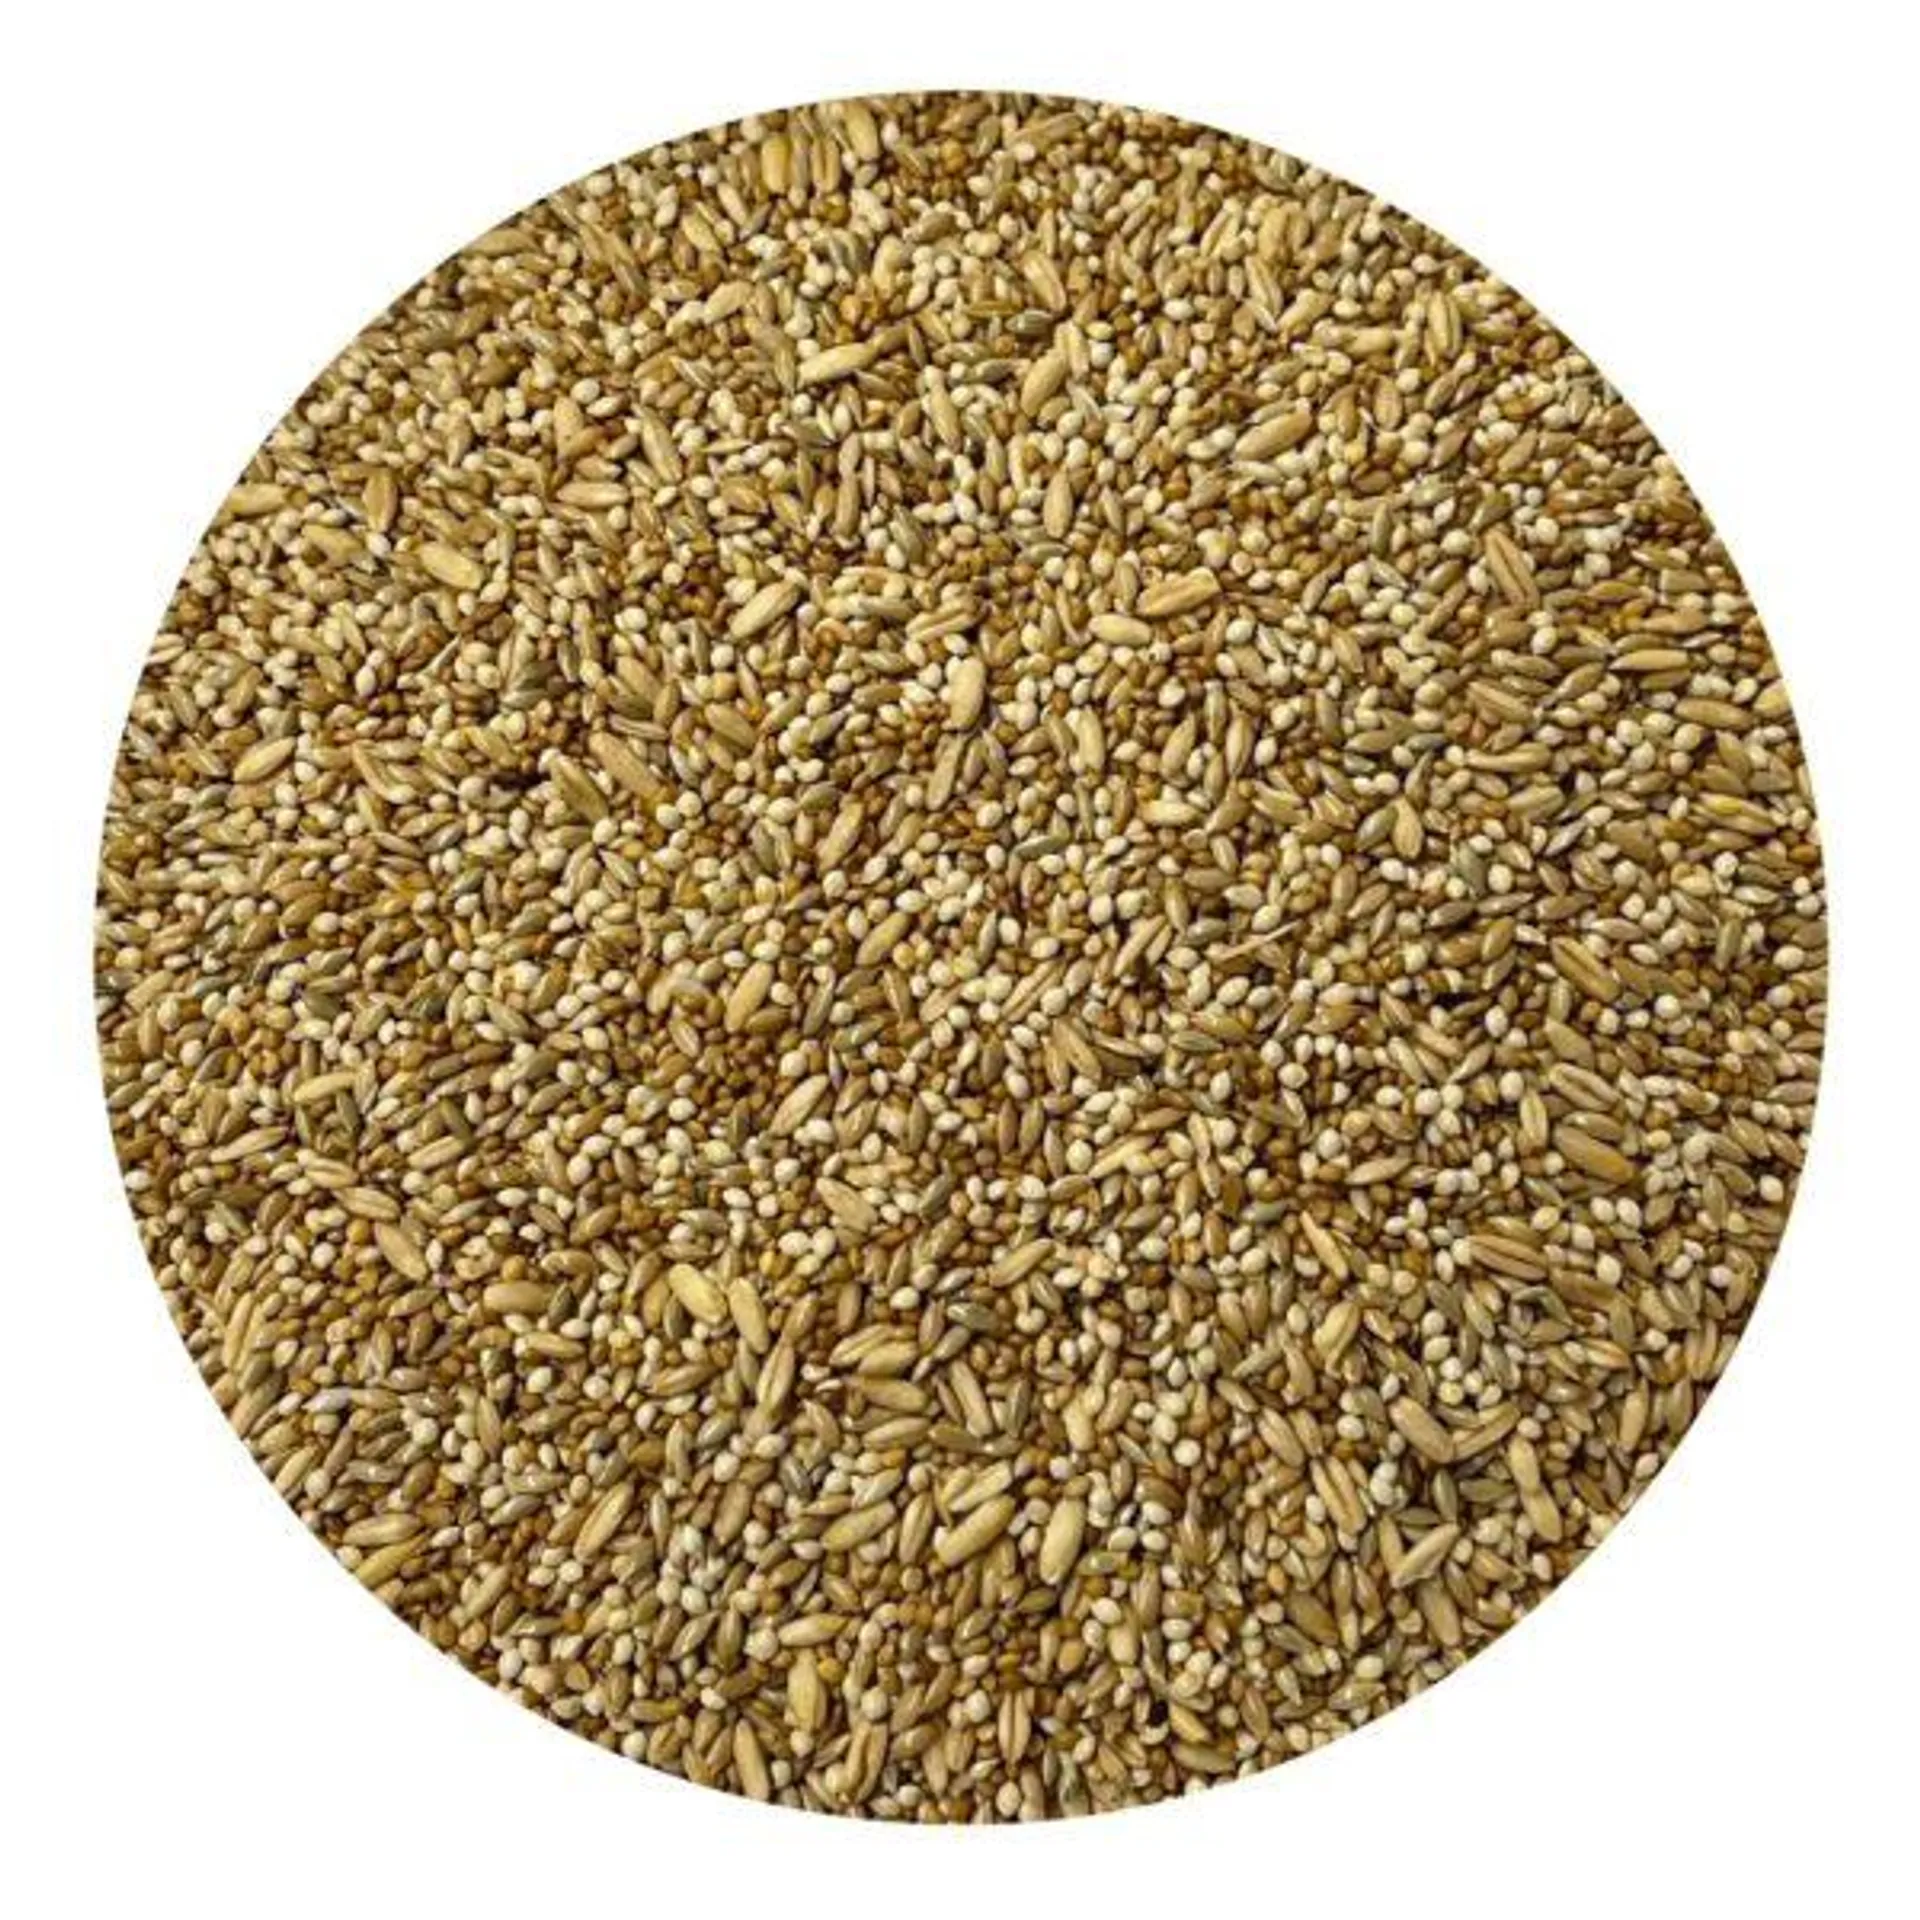 Budgie Seed Mix 1kg